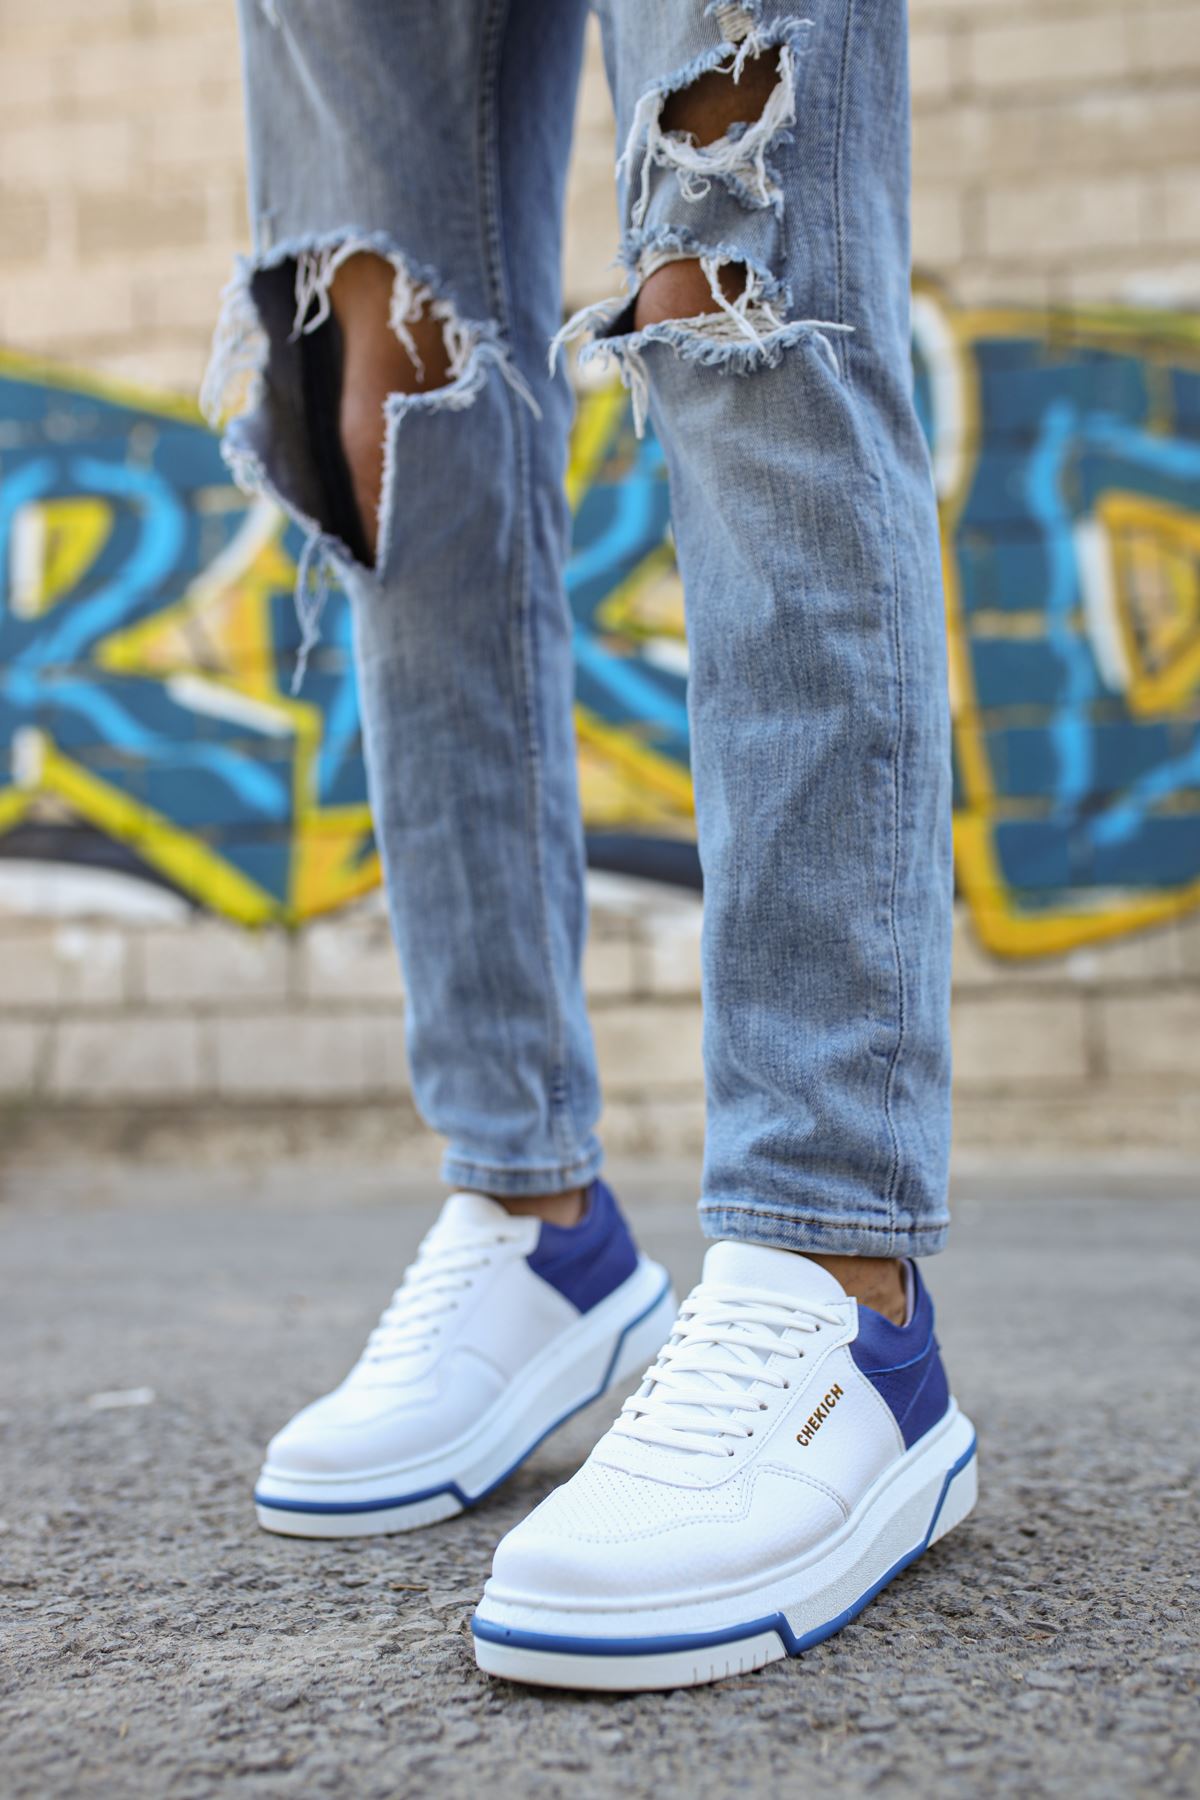 CH075 Men's Unisex White-Blue Casual Sneaker Sports Shoes - STREETMODE™